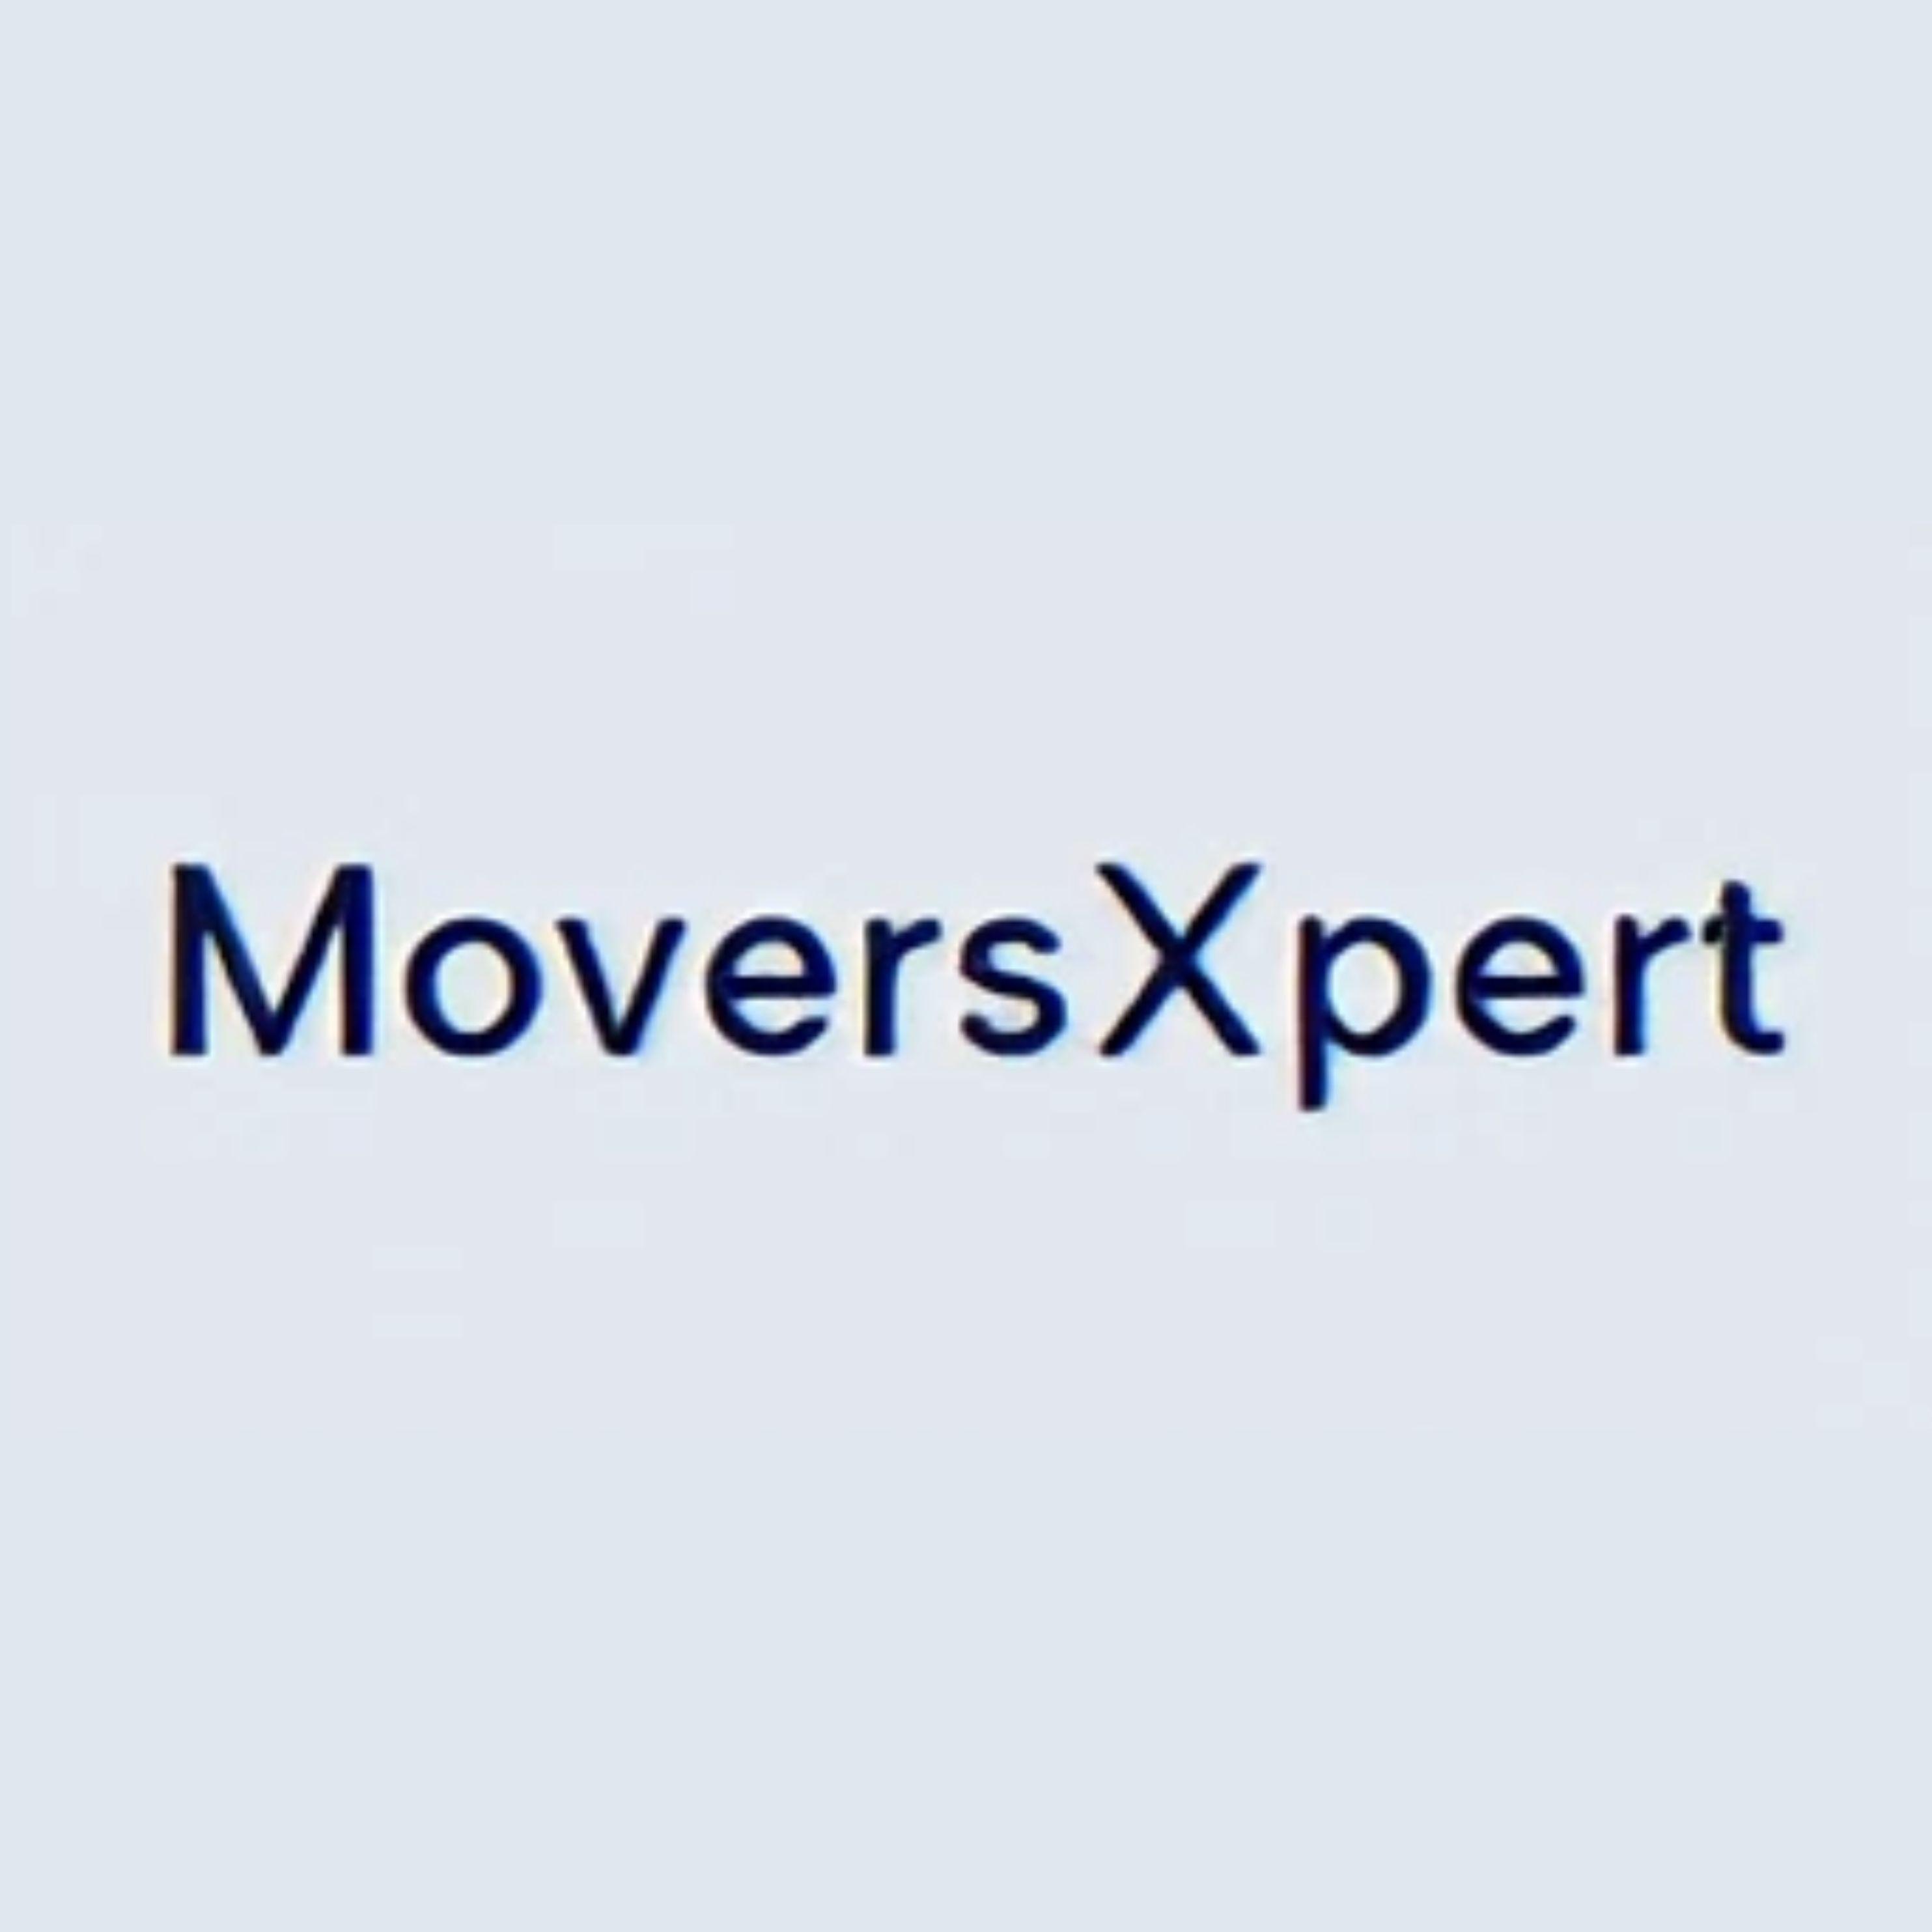 Movers Xpert